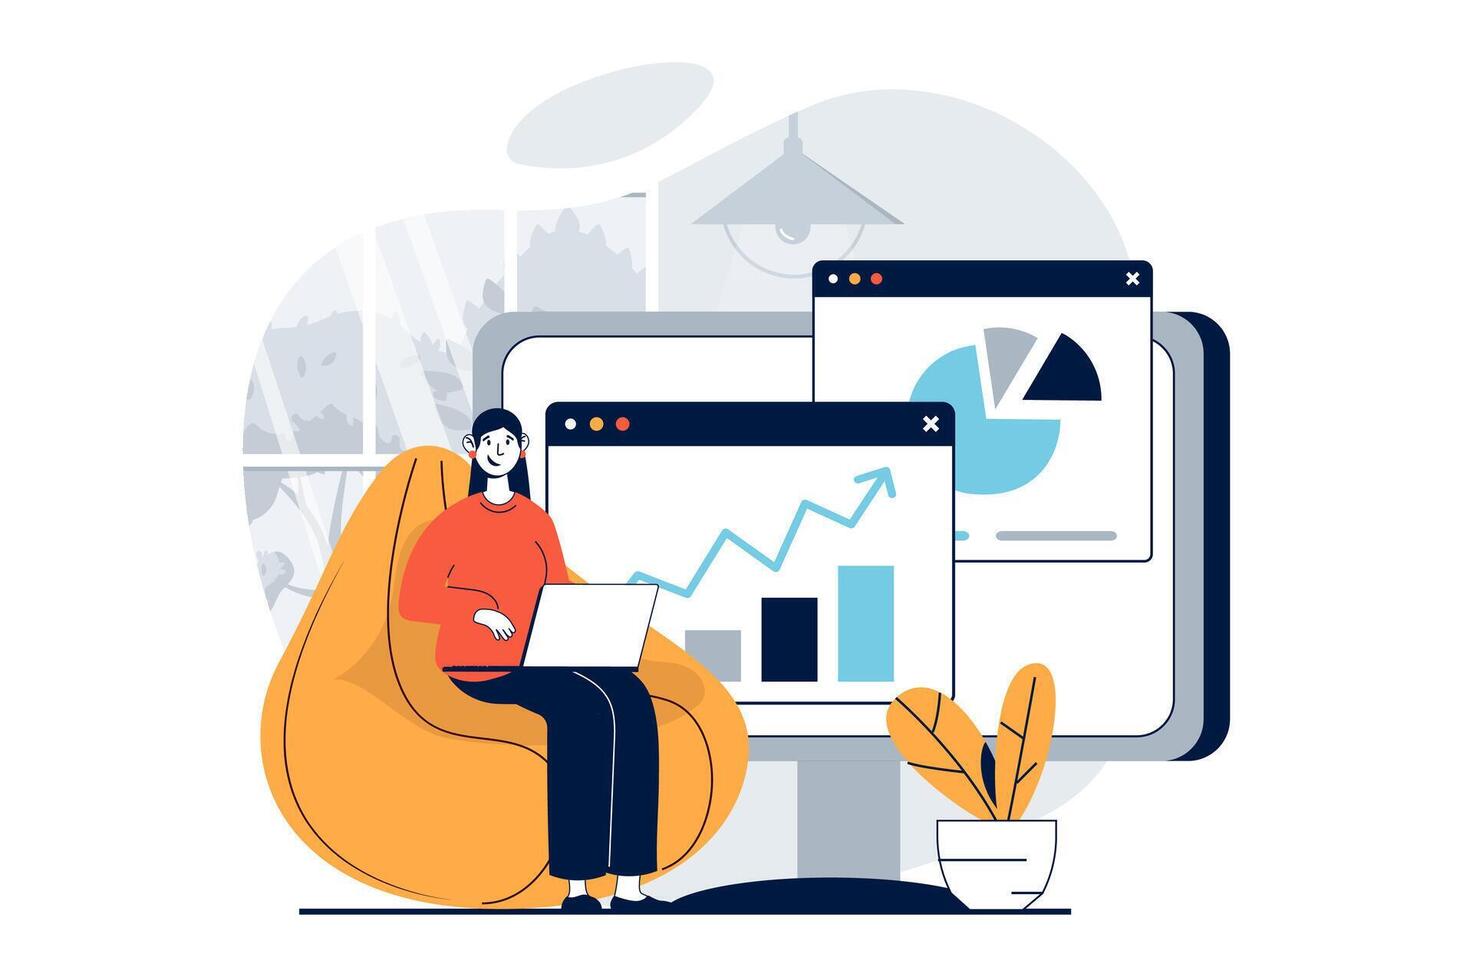 Data science concept with people scene in flat design for web. Woman working with charts and diagram, using database for calculation. Vector illustration for social media banner, marketing material.